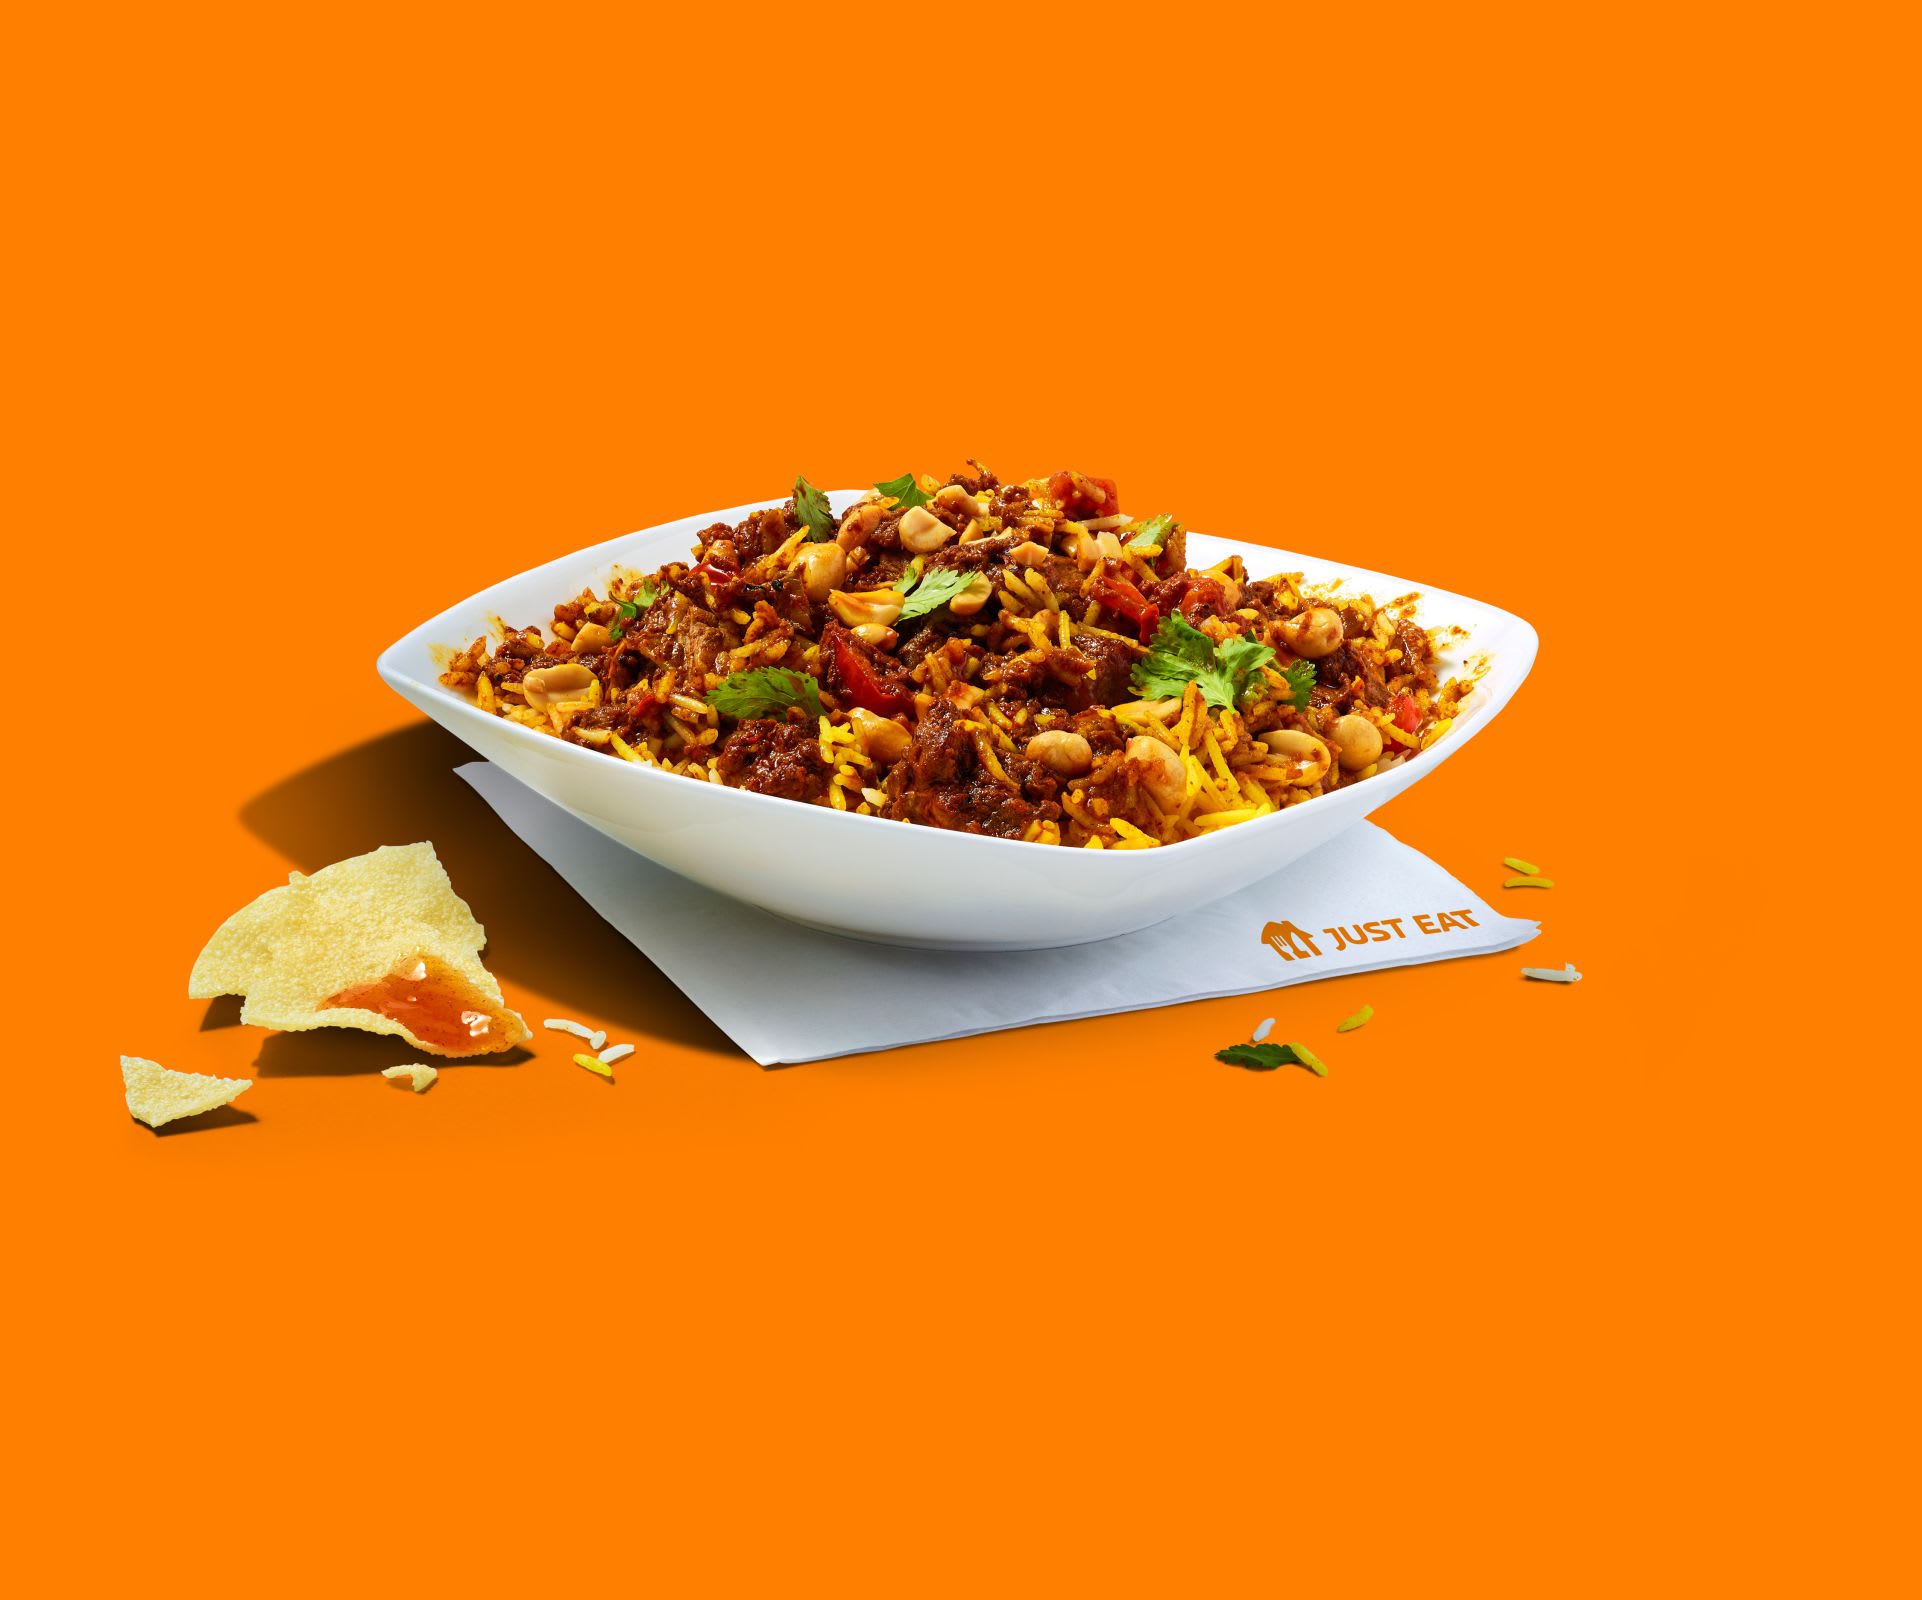 Pakistani Takeaways and Restaurants Delivering Near Me | Order from Just Eat